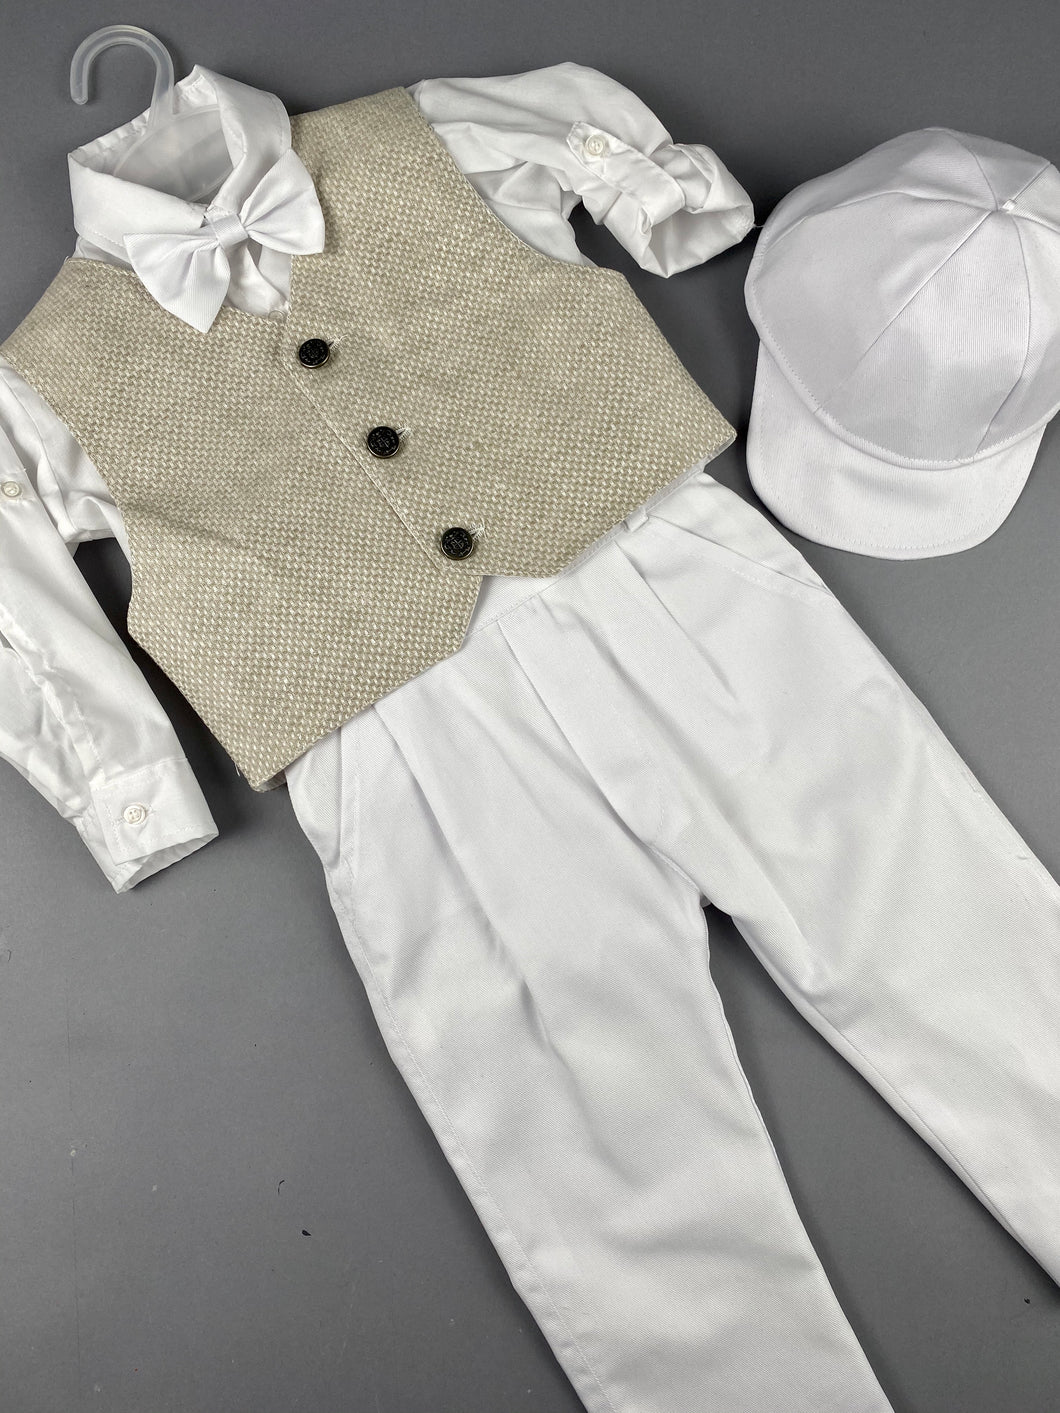 Rosies Collections 7pc full suit, Dress shirt with cuff sleeves, Pants, Jacket with Matching Vest, Belt or Suspenders, Cap. Made in Greece exclusively for Rosies Collections S201930